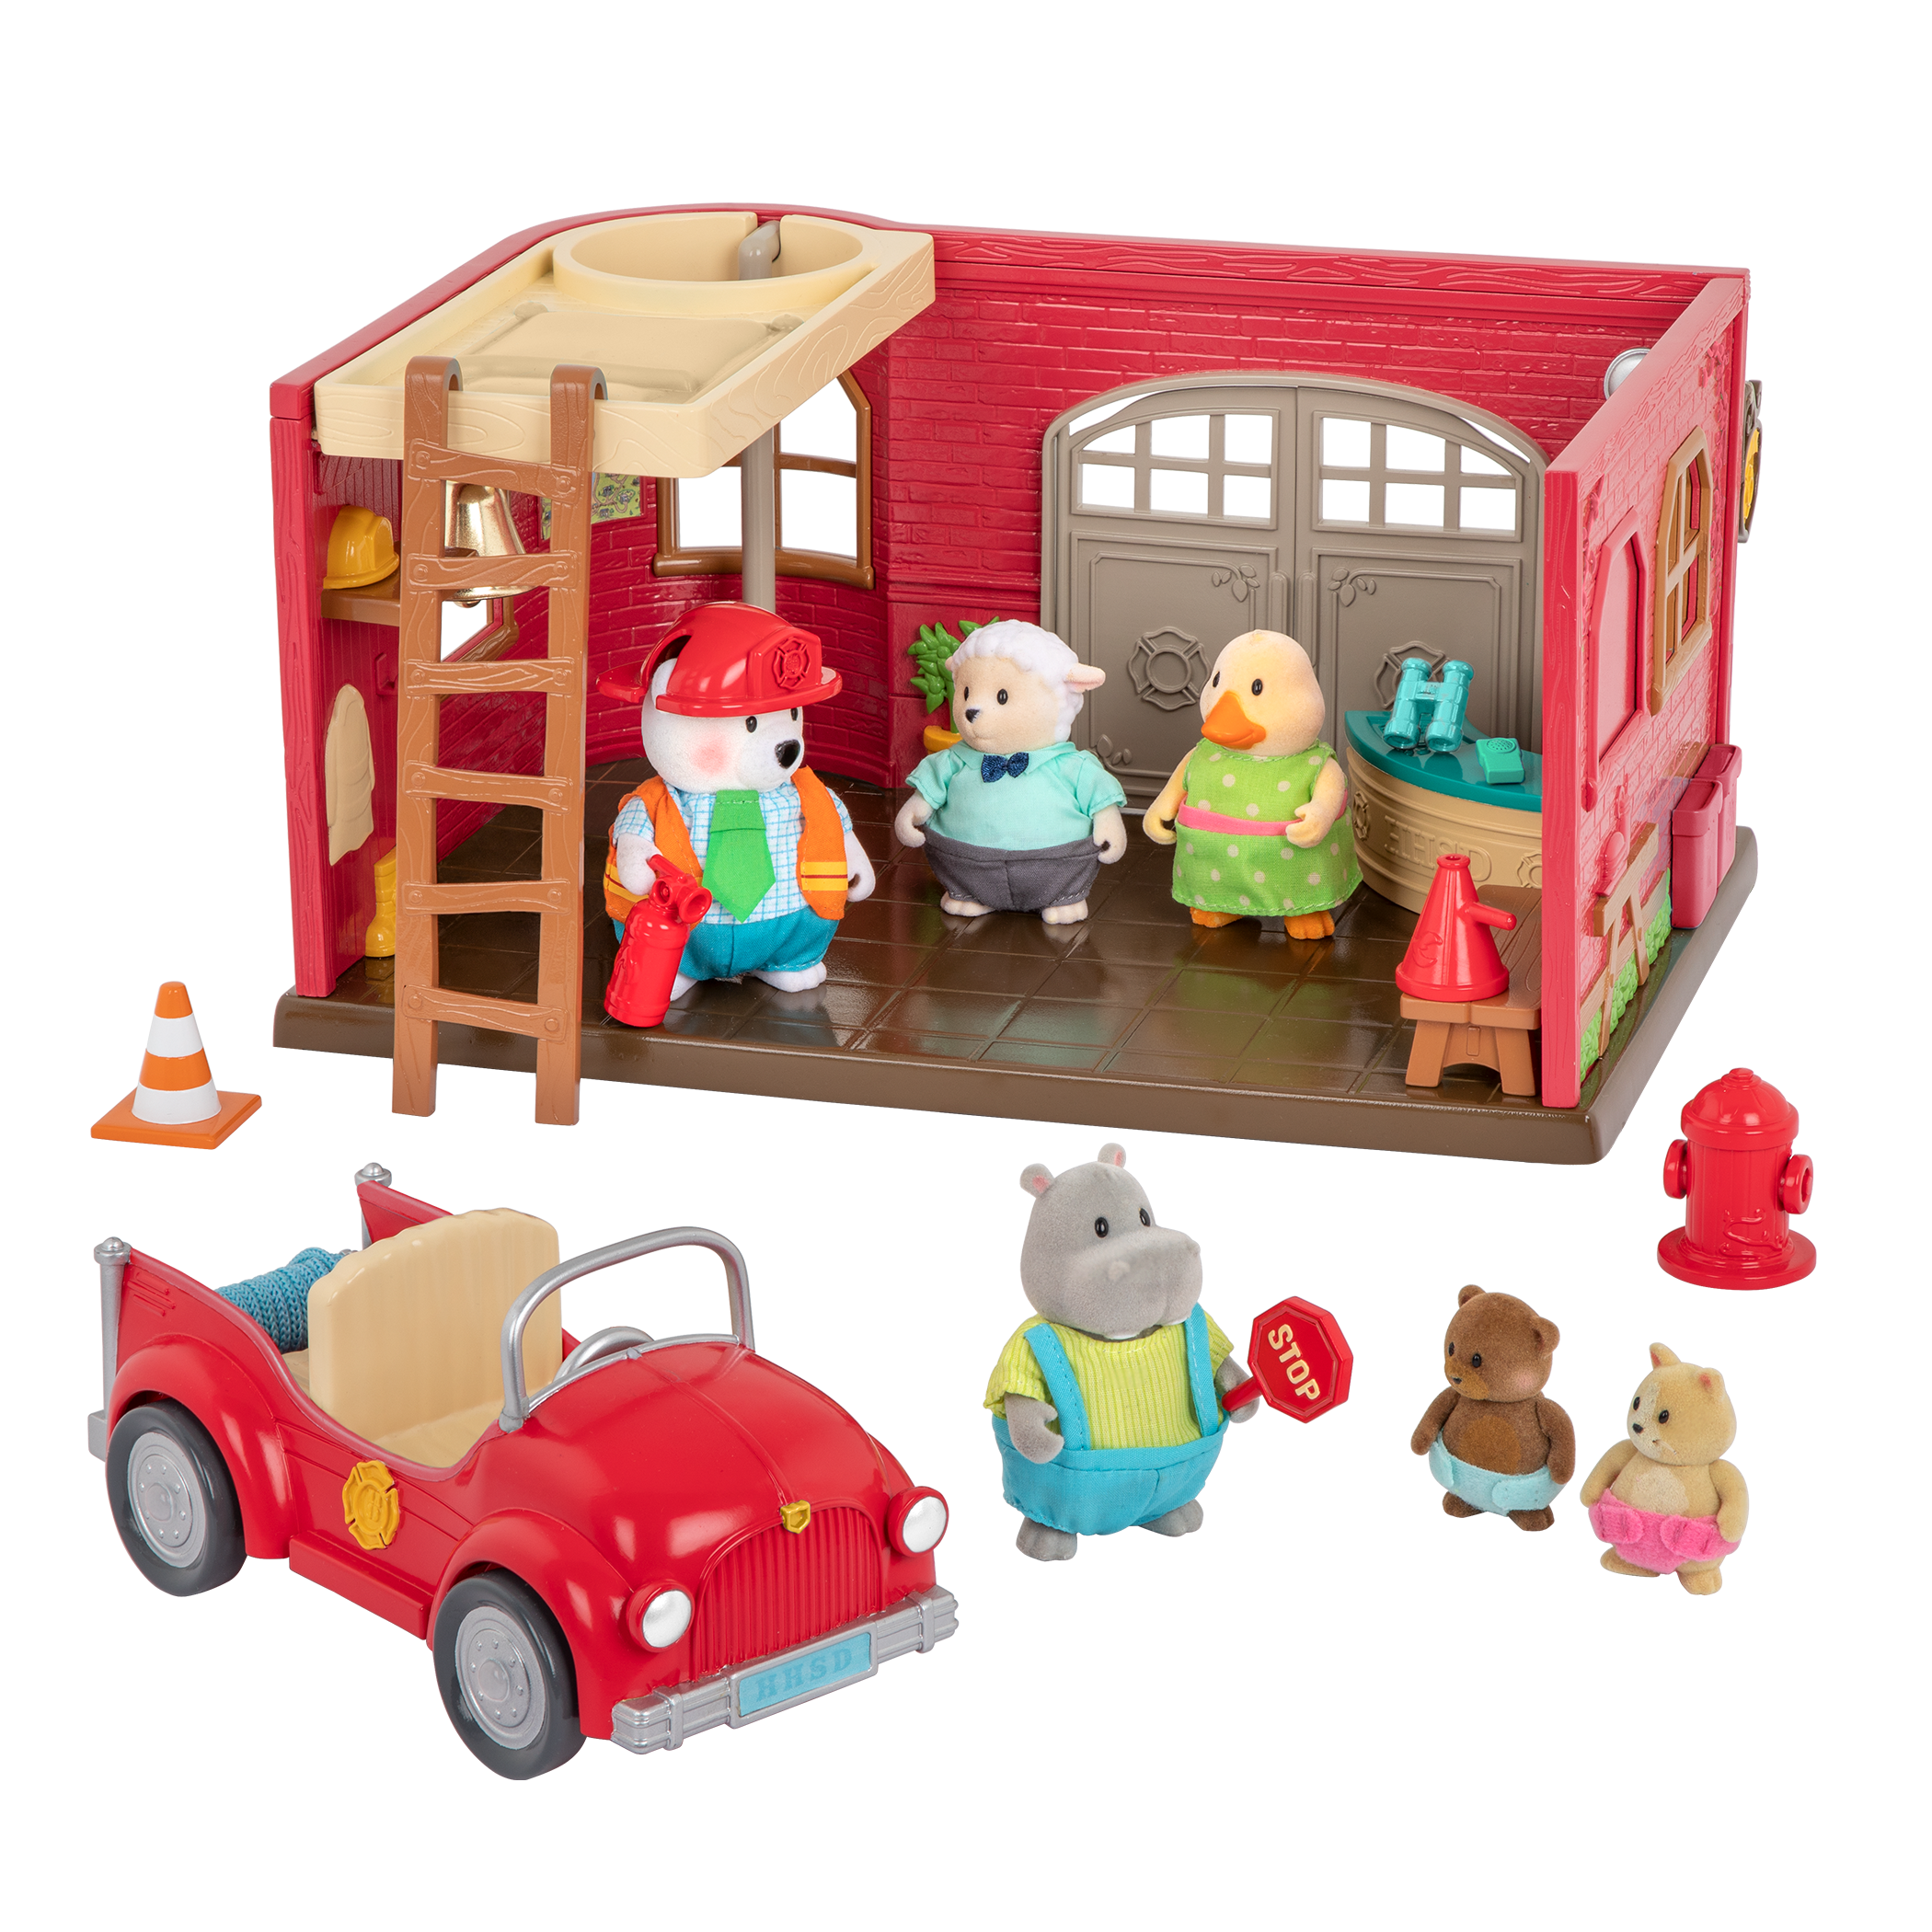 Fire department playset with animal figurines and fire engine